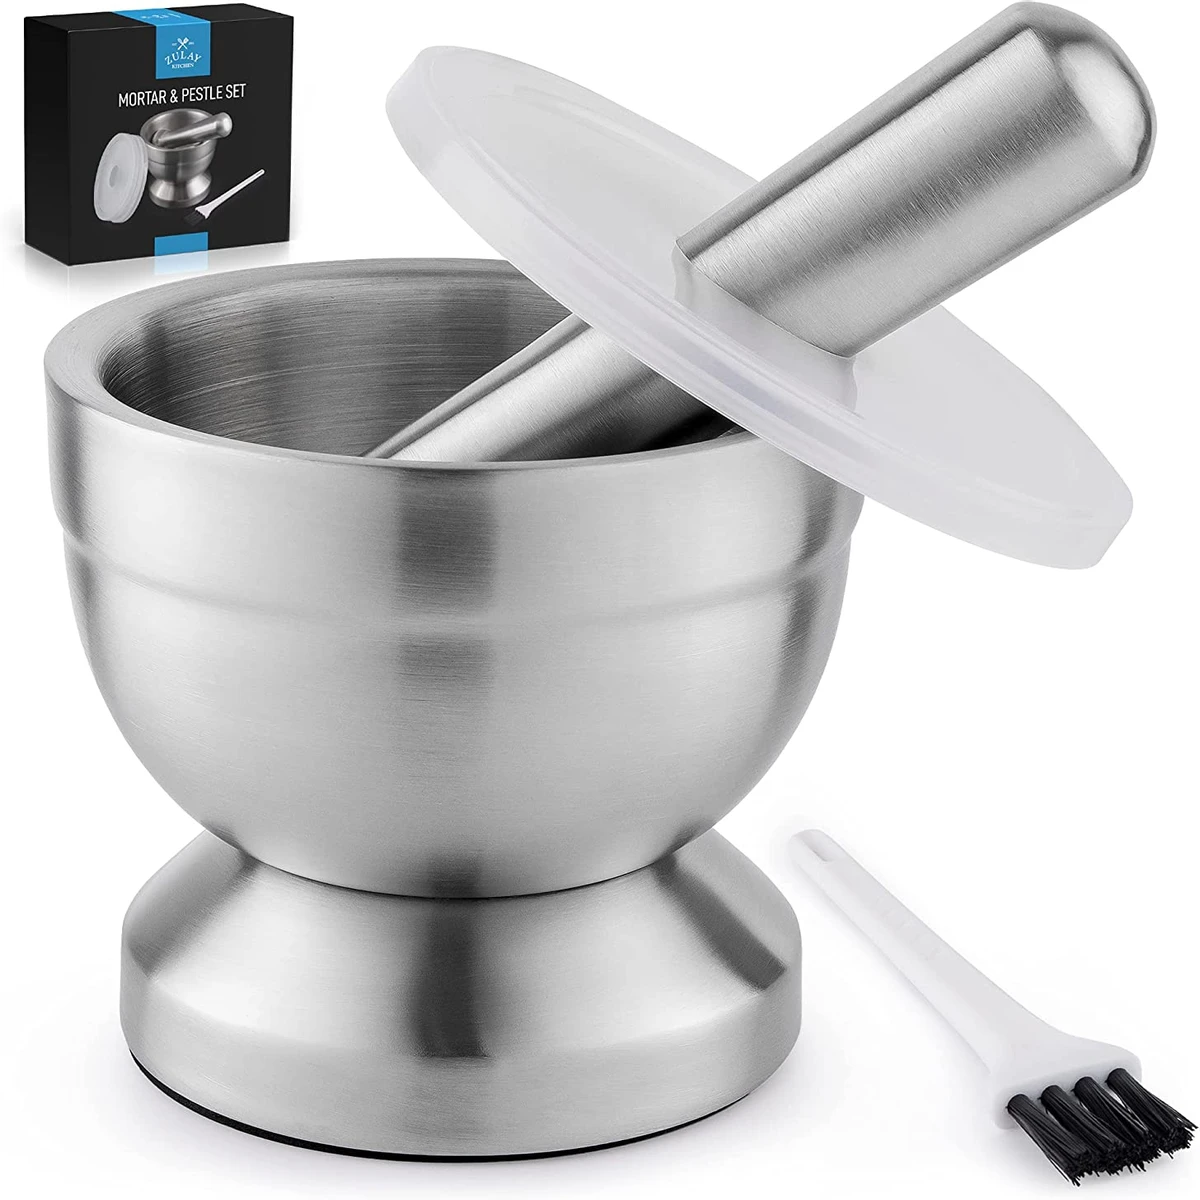 Zulay Kitchen 4-Inch Stainless Steel Mortar and Pestle Set Small - 1 Cup Pestle and Mortar With Protective Lid & Brush - Heavy Duty Mortar Pestle for Molcajete Bowl, Pill Crusher & Spice Herb Grinder